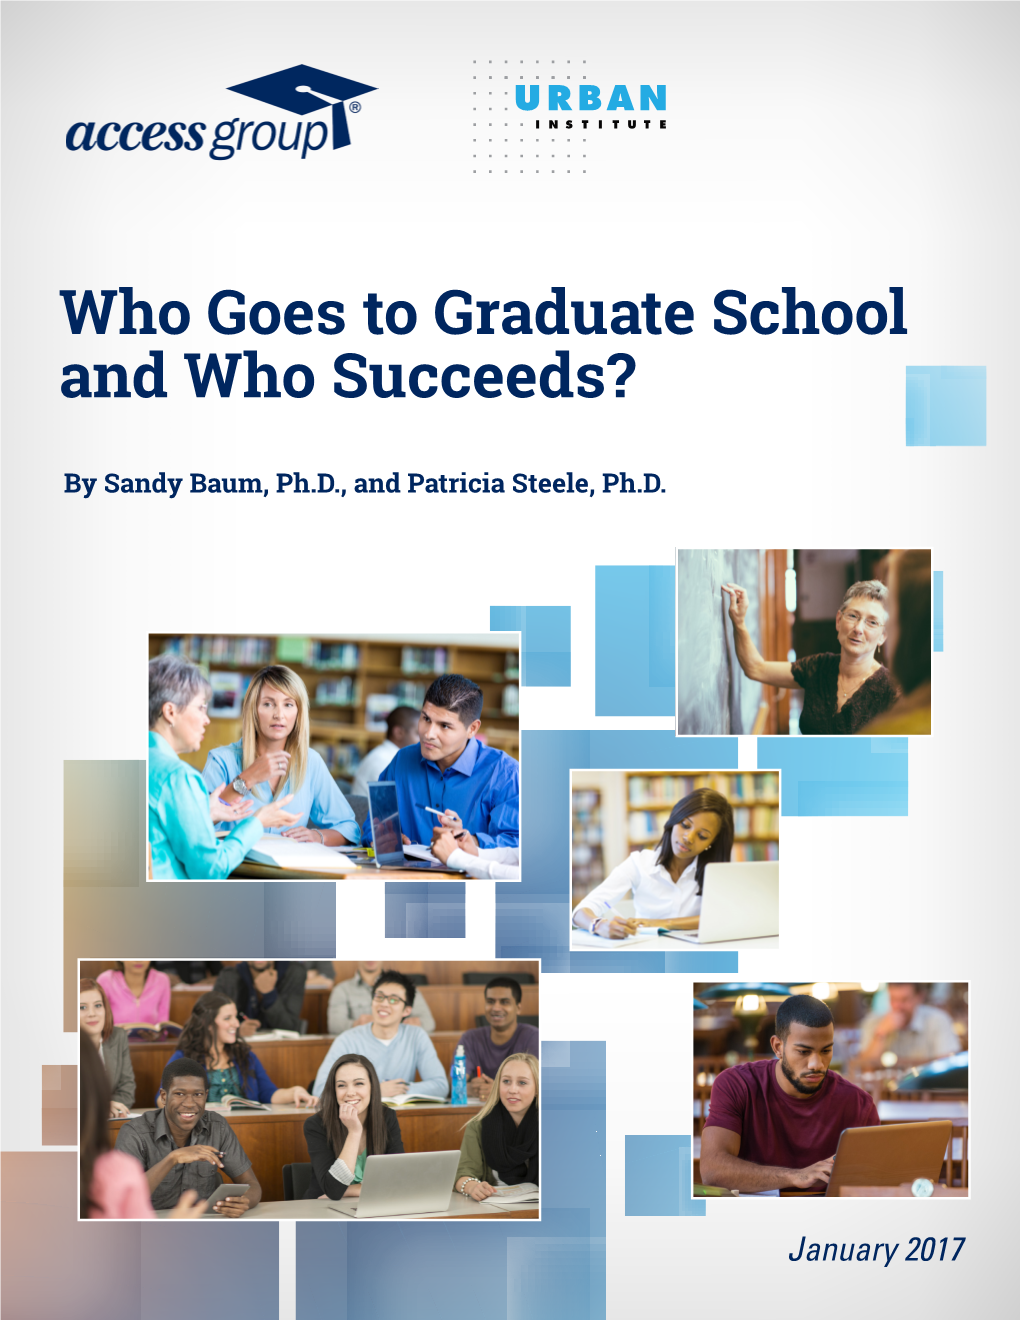 Who Goes to Graduate School and Who Succeeds?